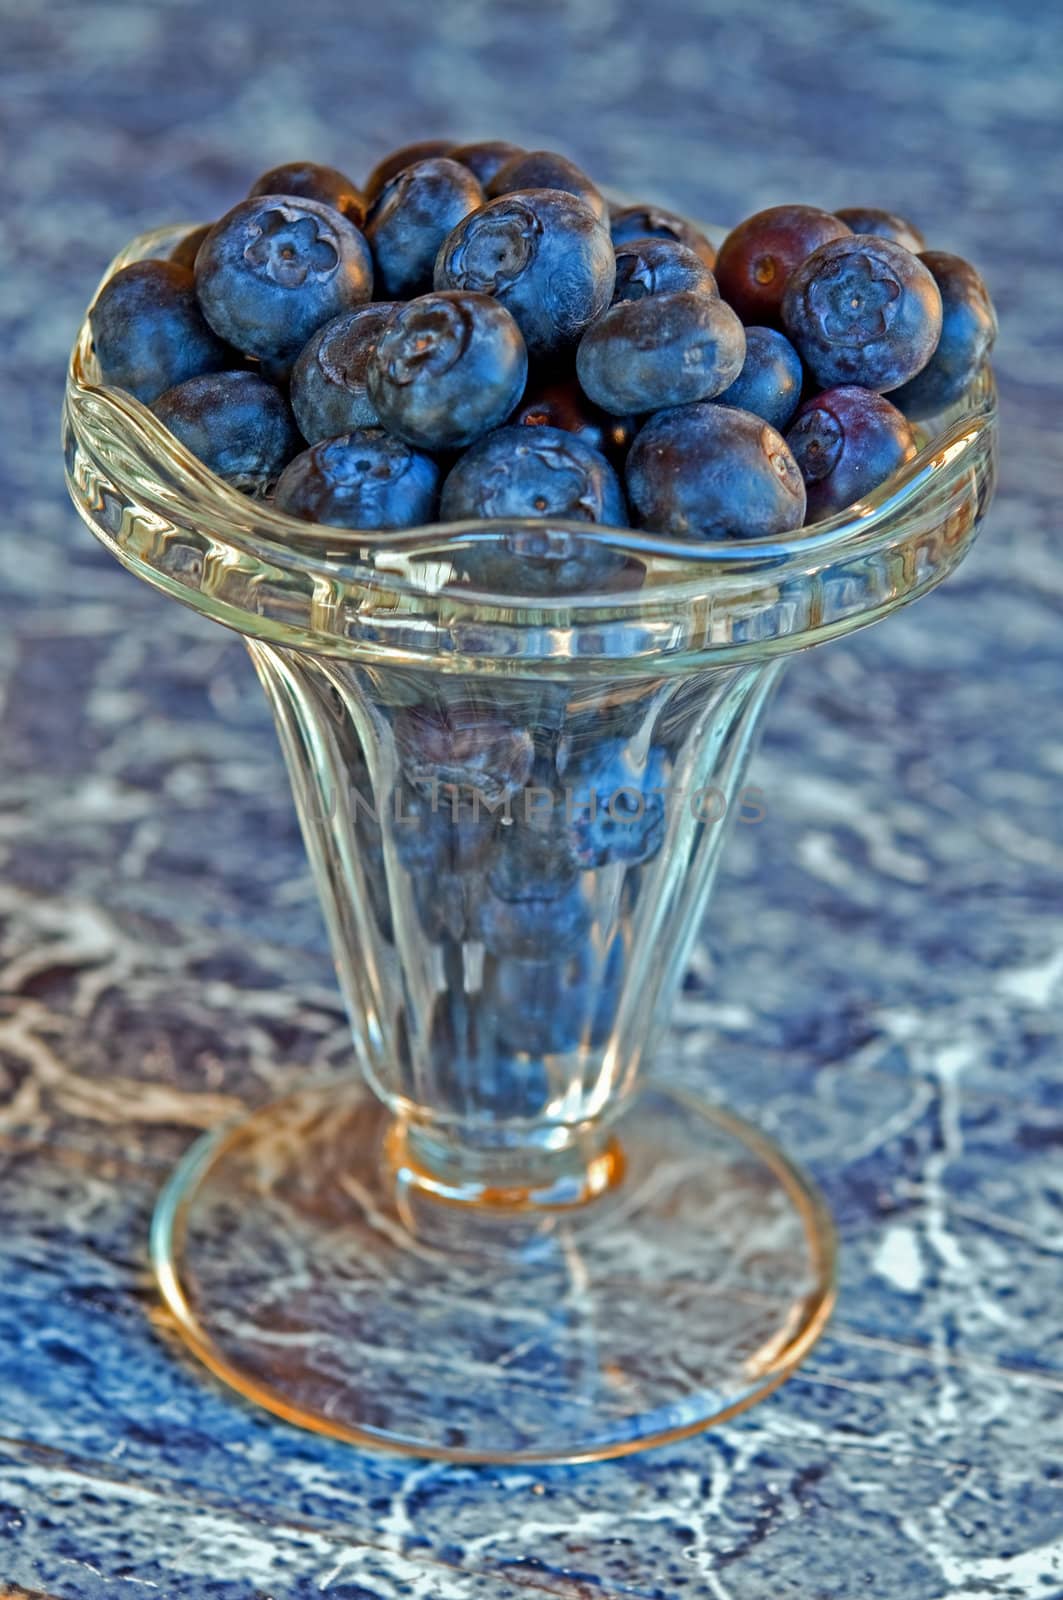 Blueberries in a crystal glass